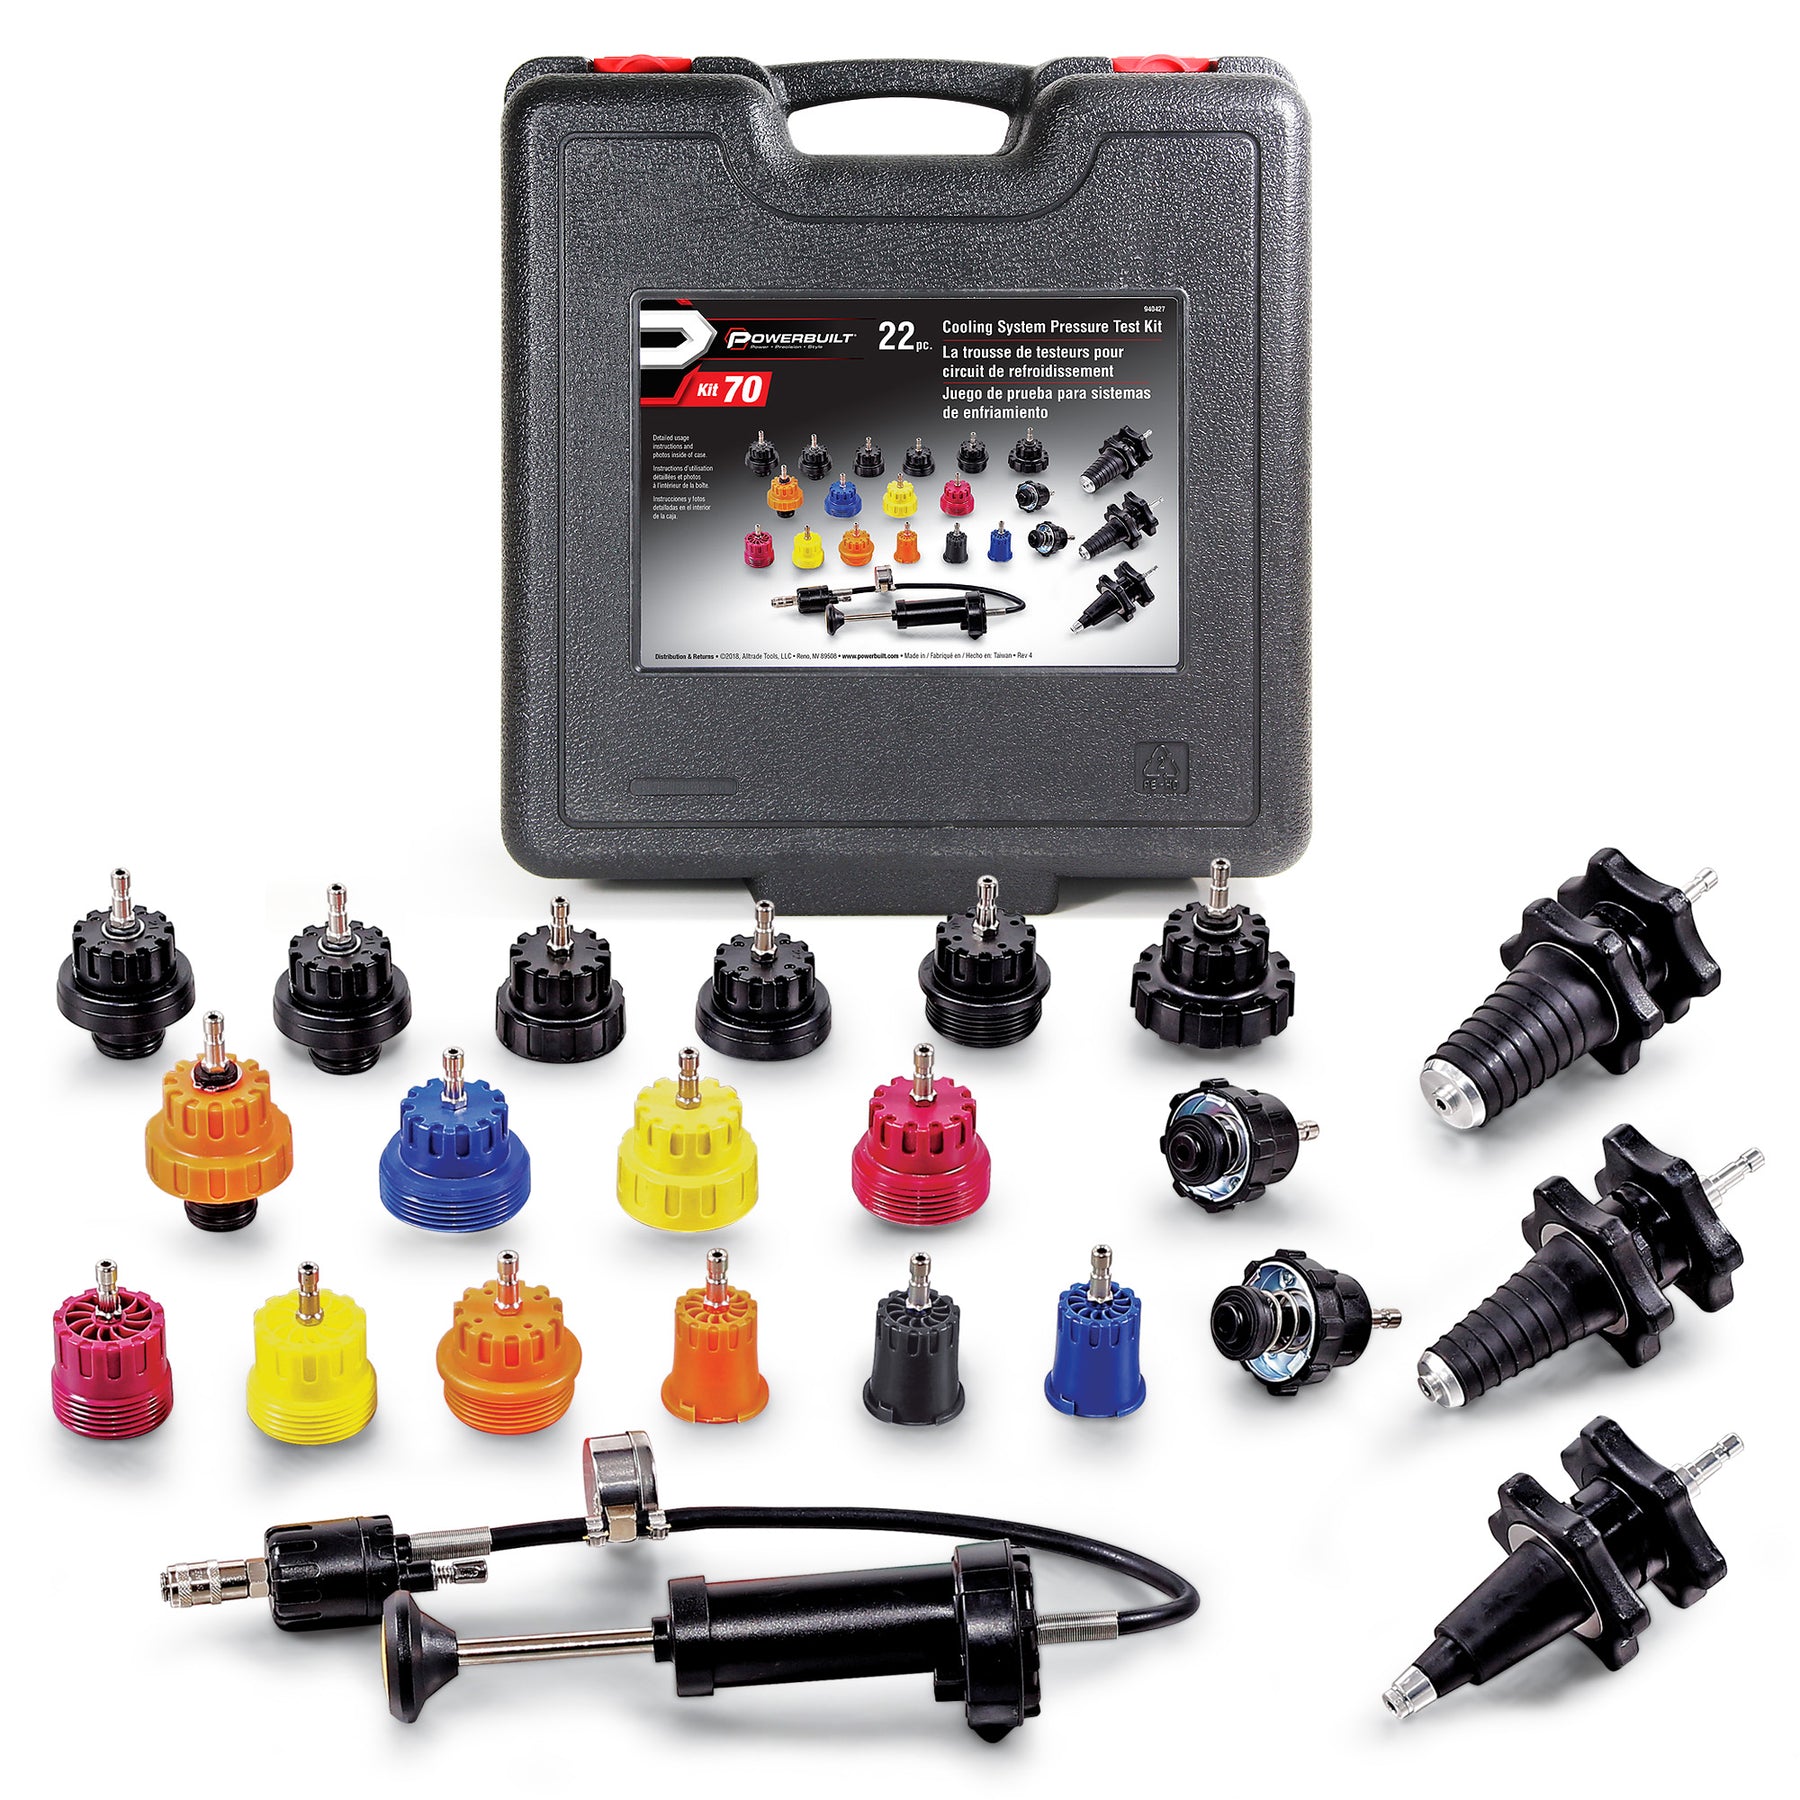 22 Piece Cooling System Pressure Tool Kit - Service and Leak